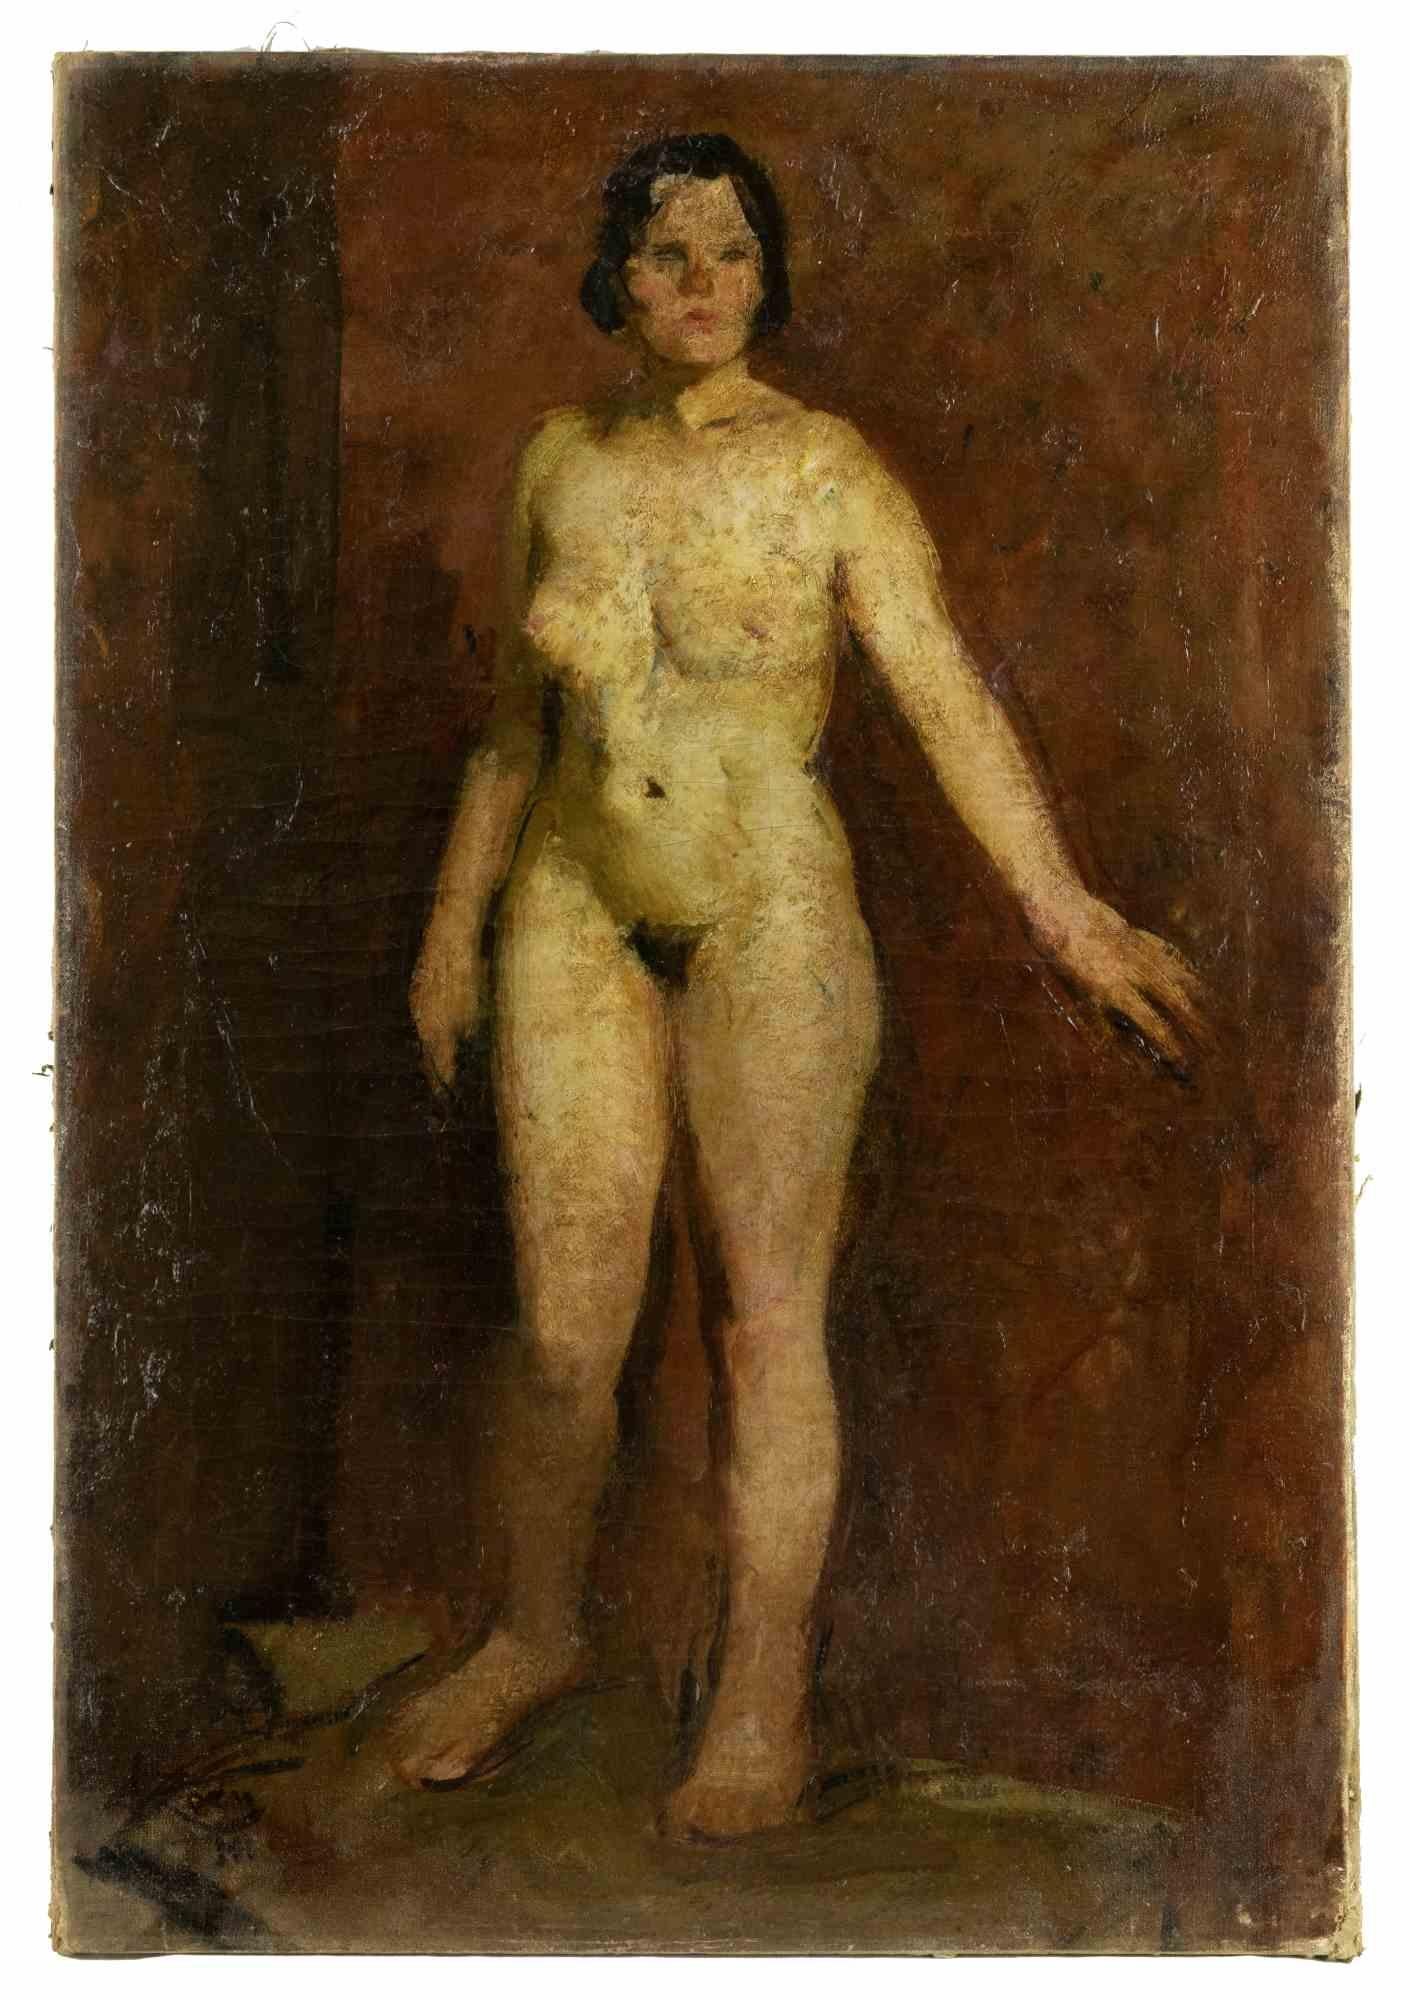 Unknown Figurative Painting - Nude Model - Oil Painting - Mid-20th Century